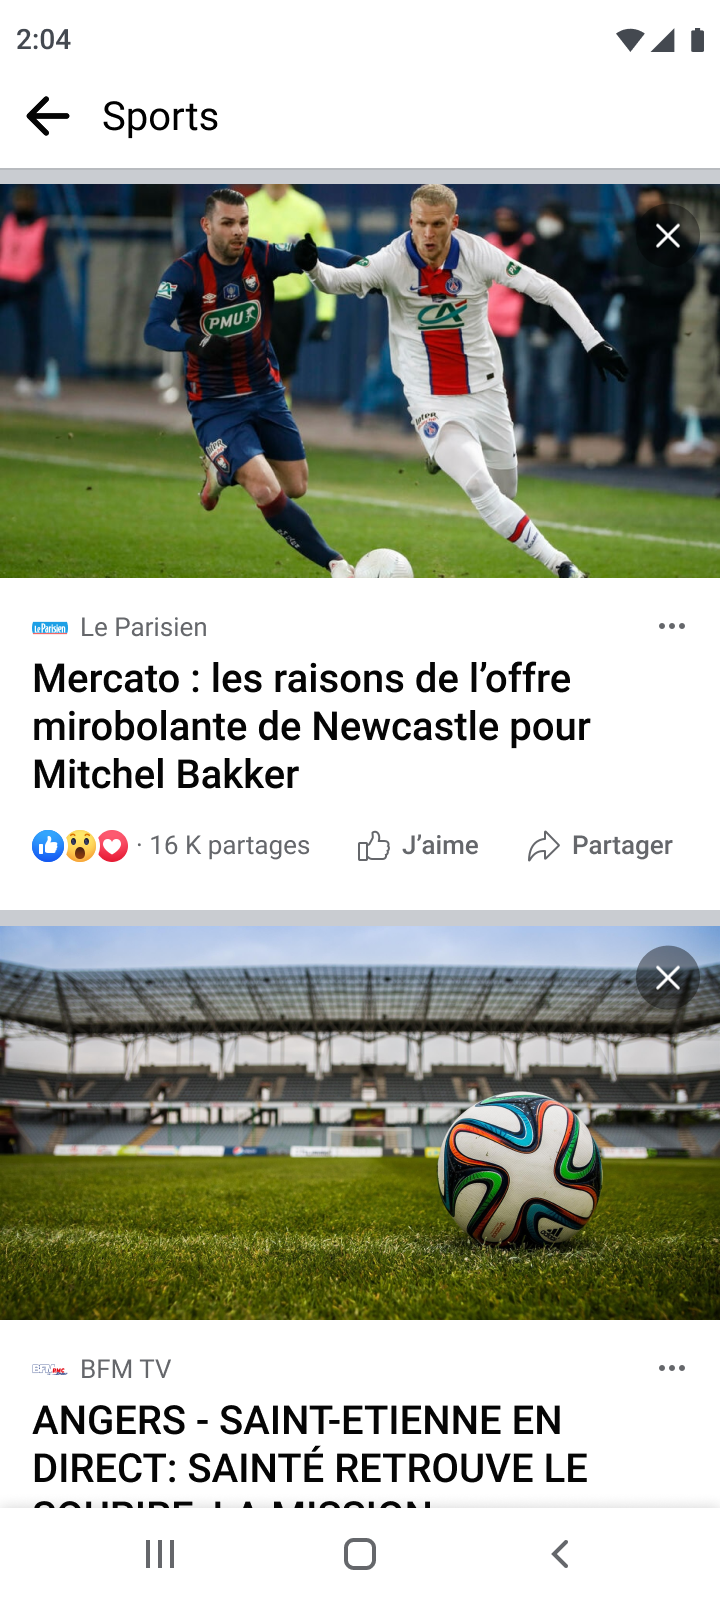 The sports section on Facebook News